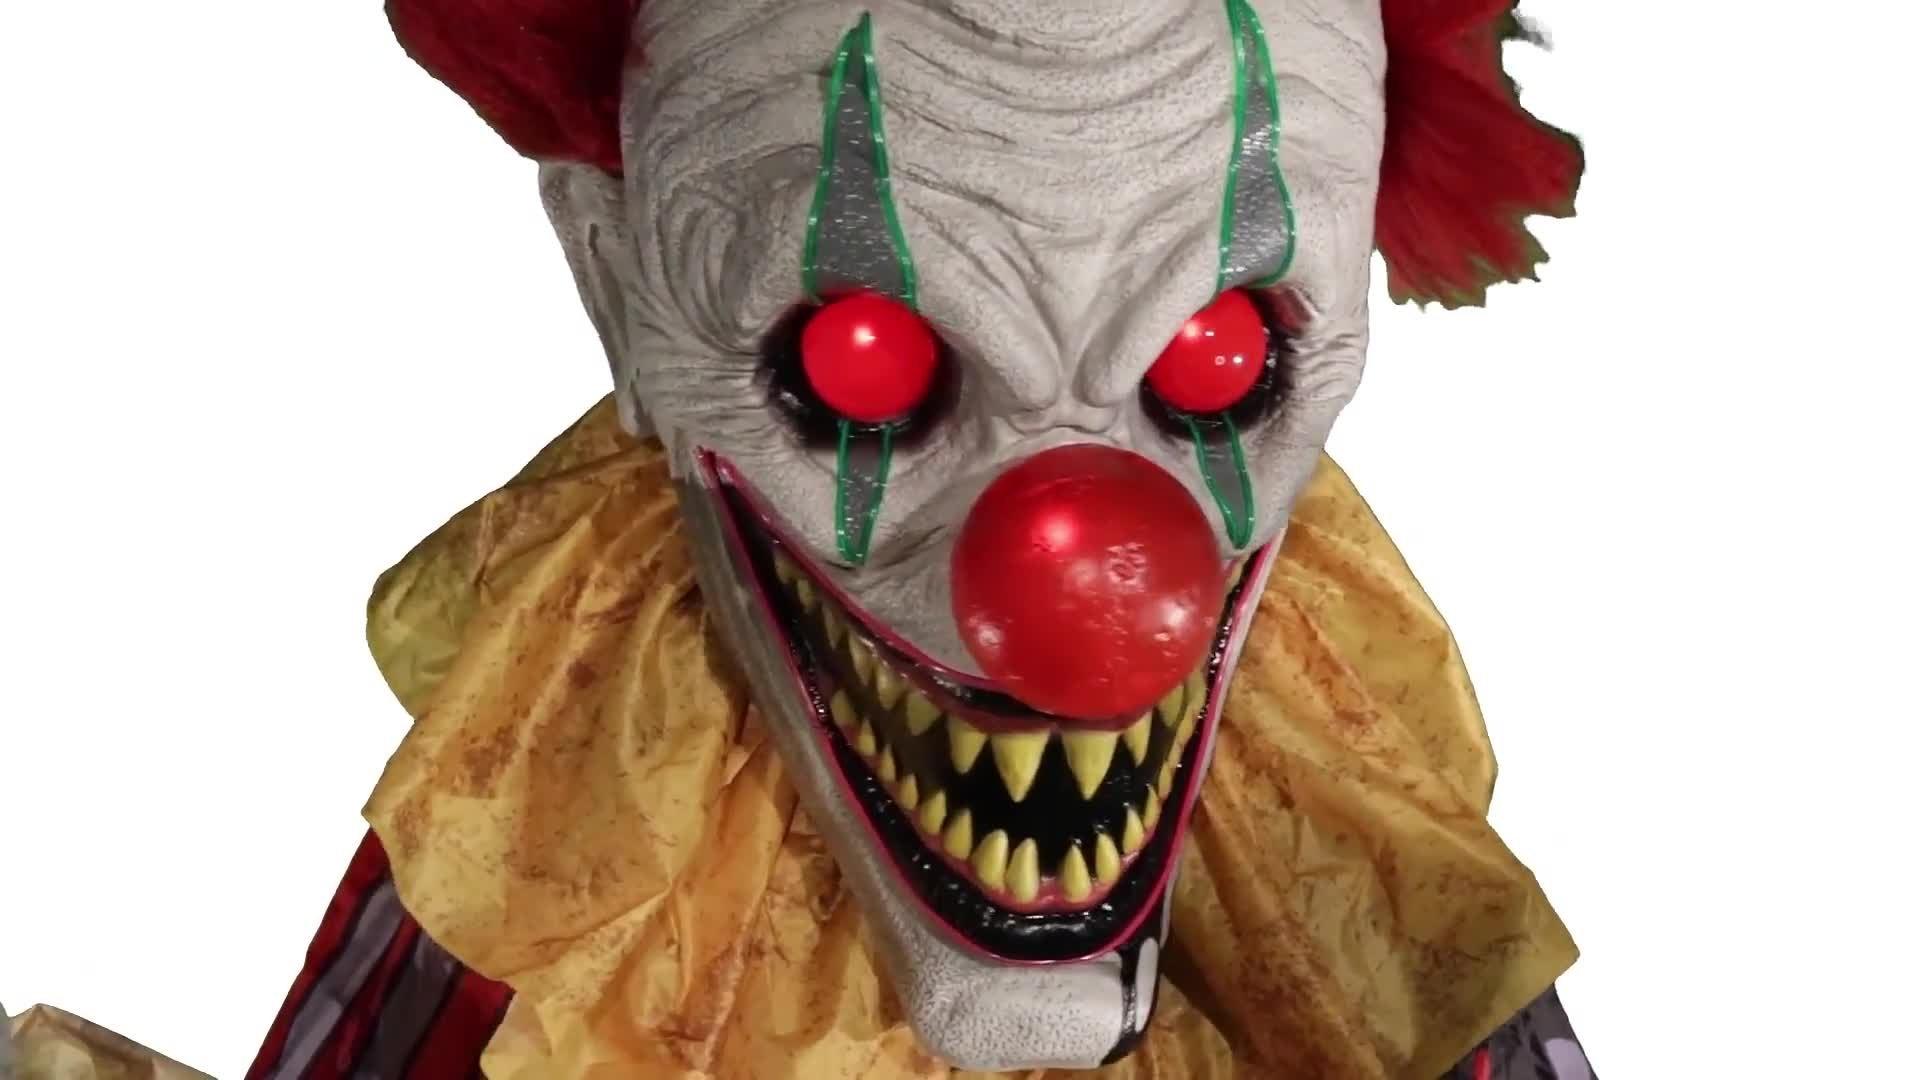 Animatronic Light-Up Talking Cackles the Clown, 12ft - Halloween Decoration